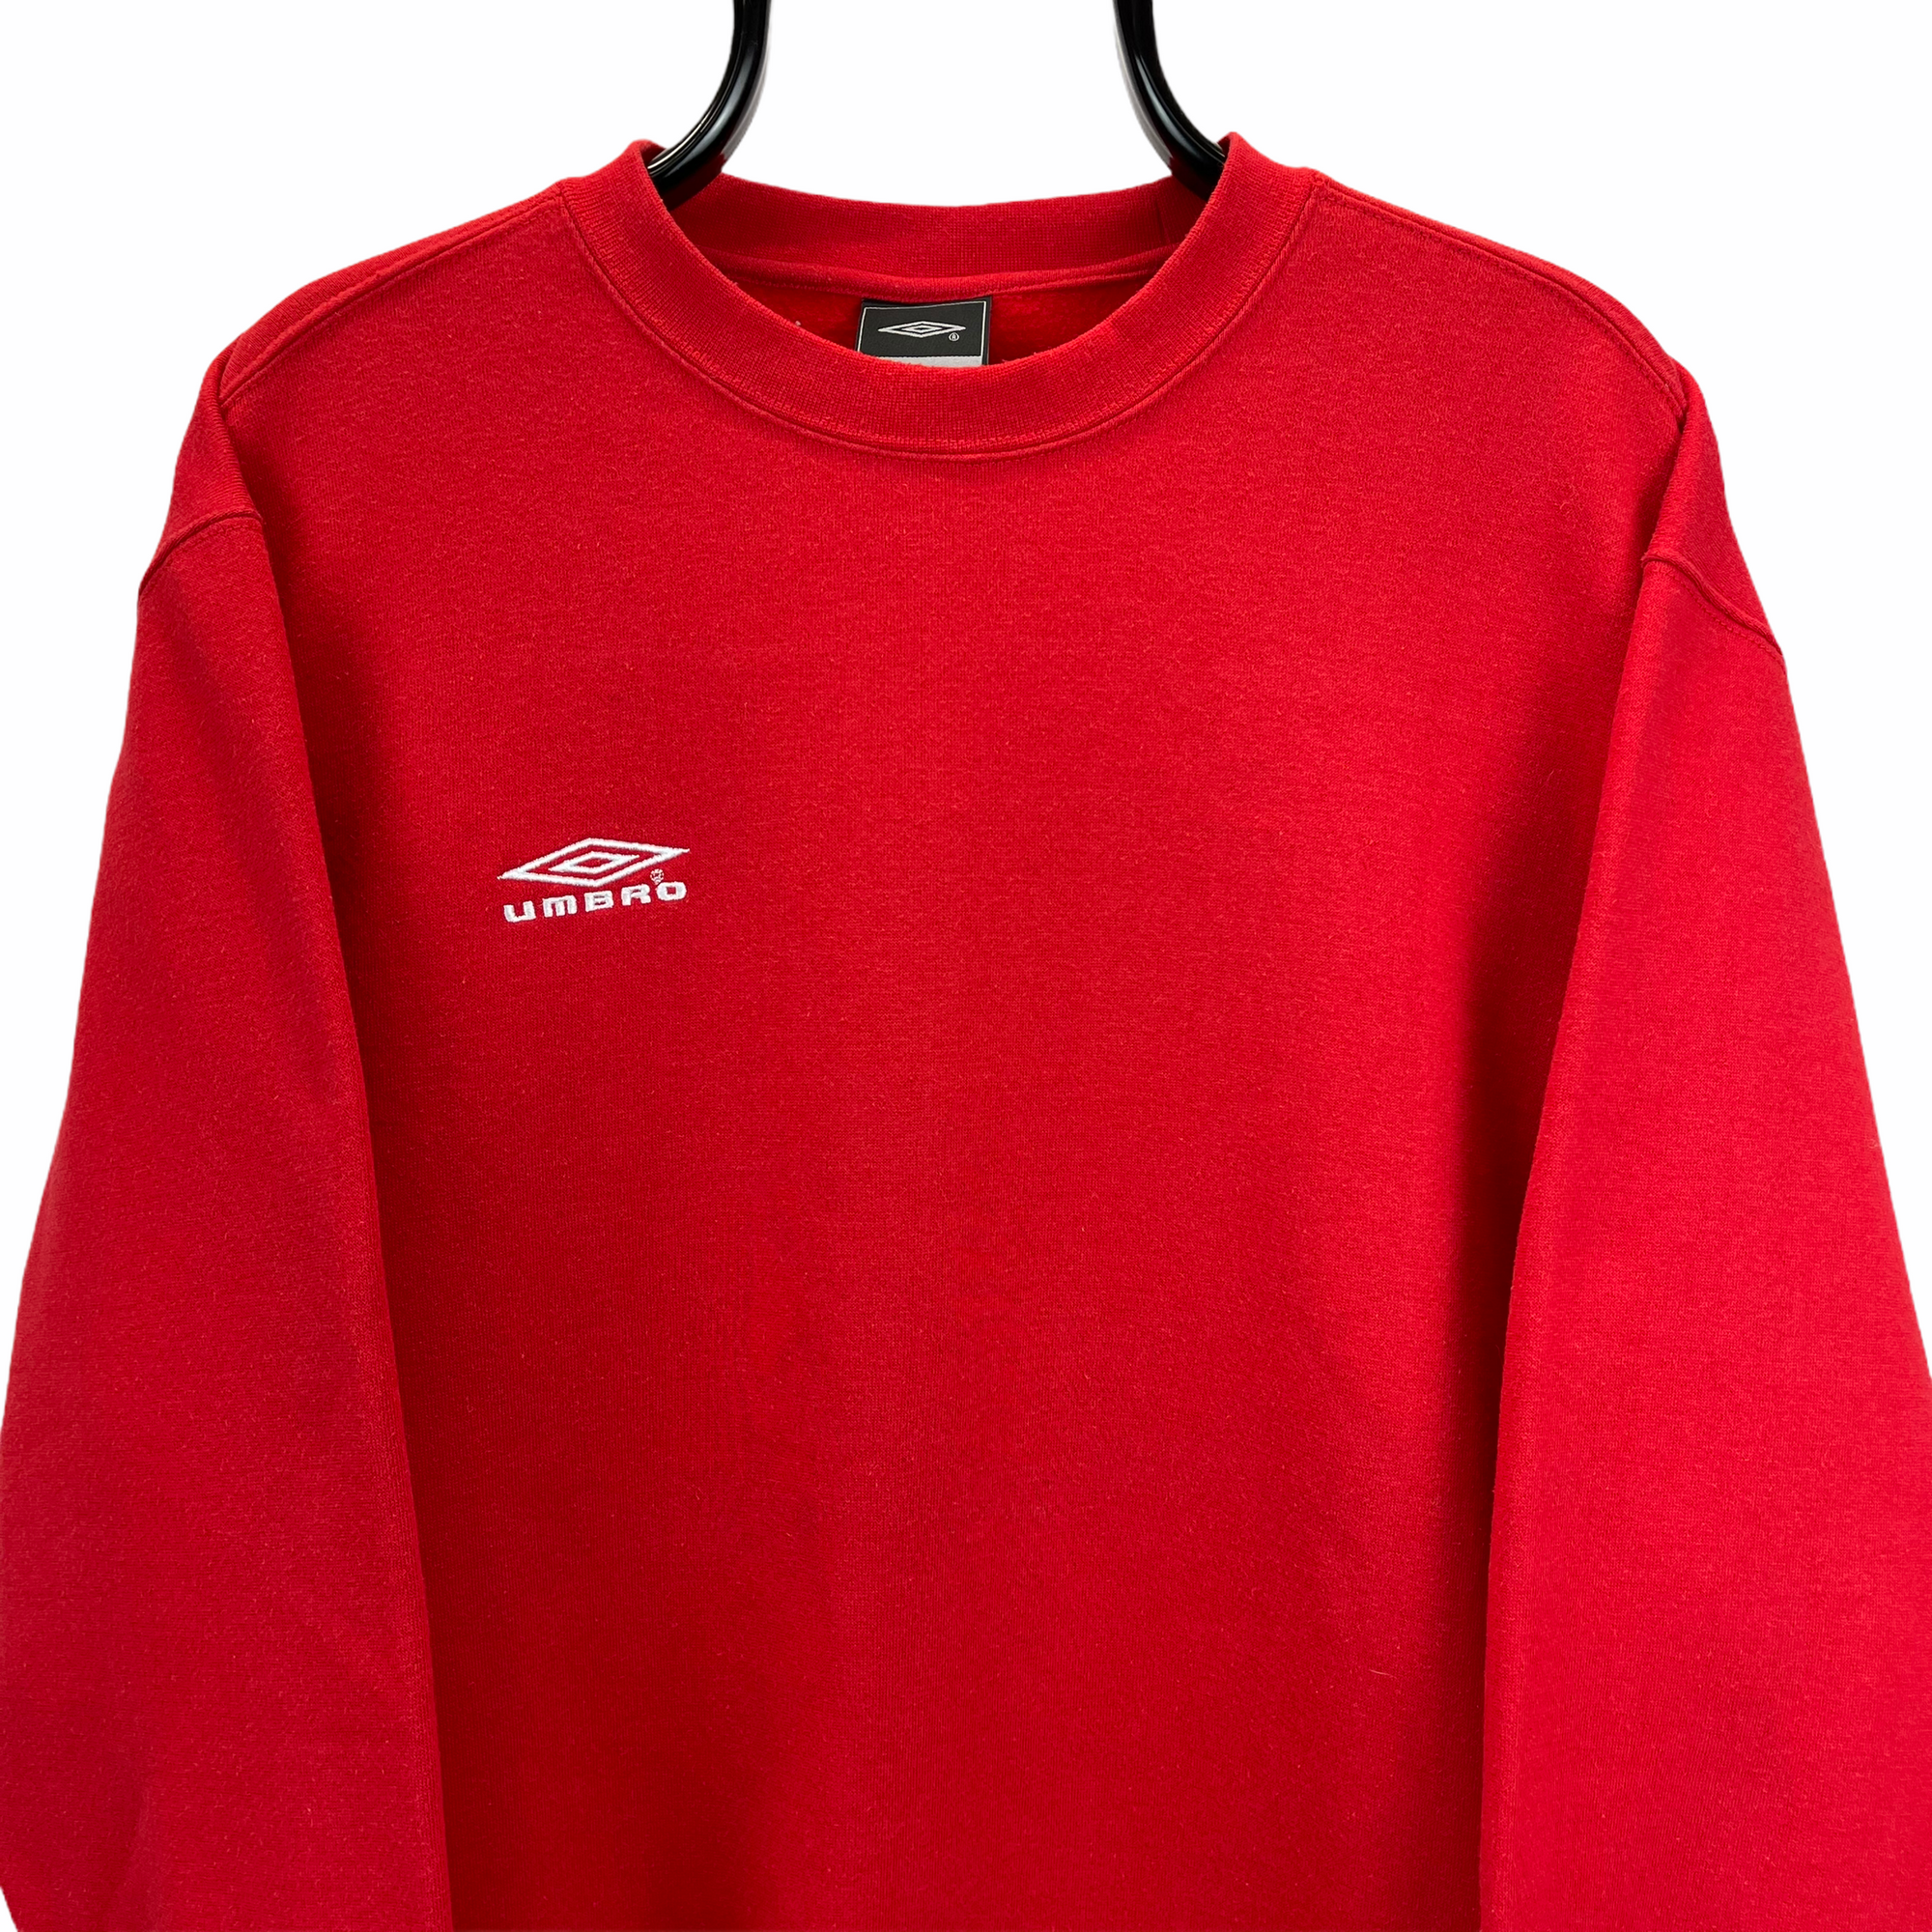 VINTAGE UMBRO EMBROIDERED SMALL LOGO SWEATSHIRT IN RED - MEN'S LARGE/WOMEN'S XL